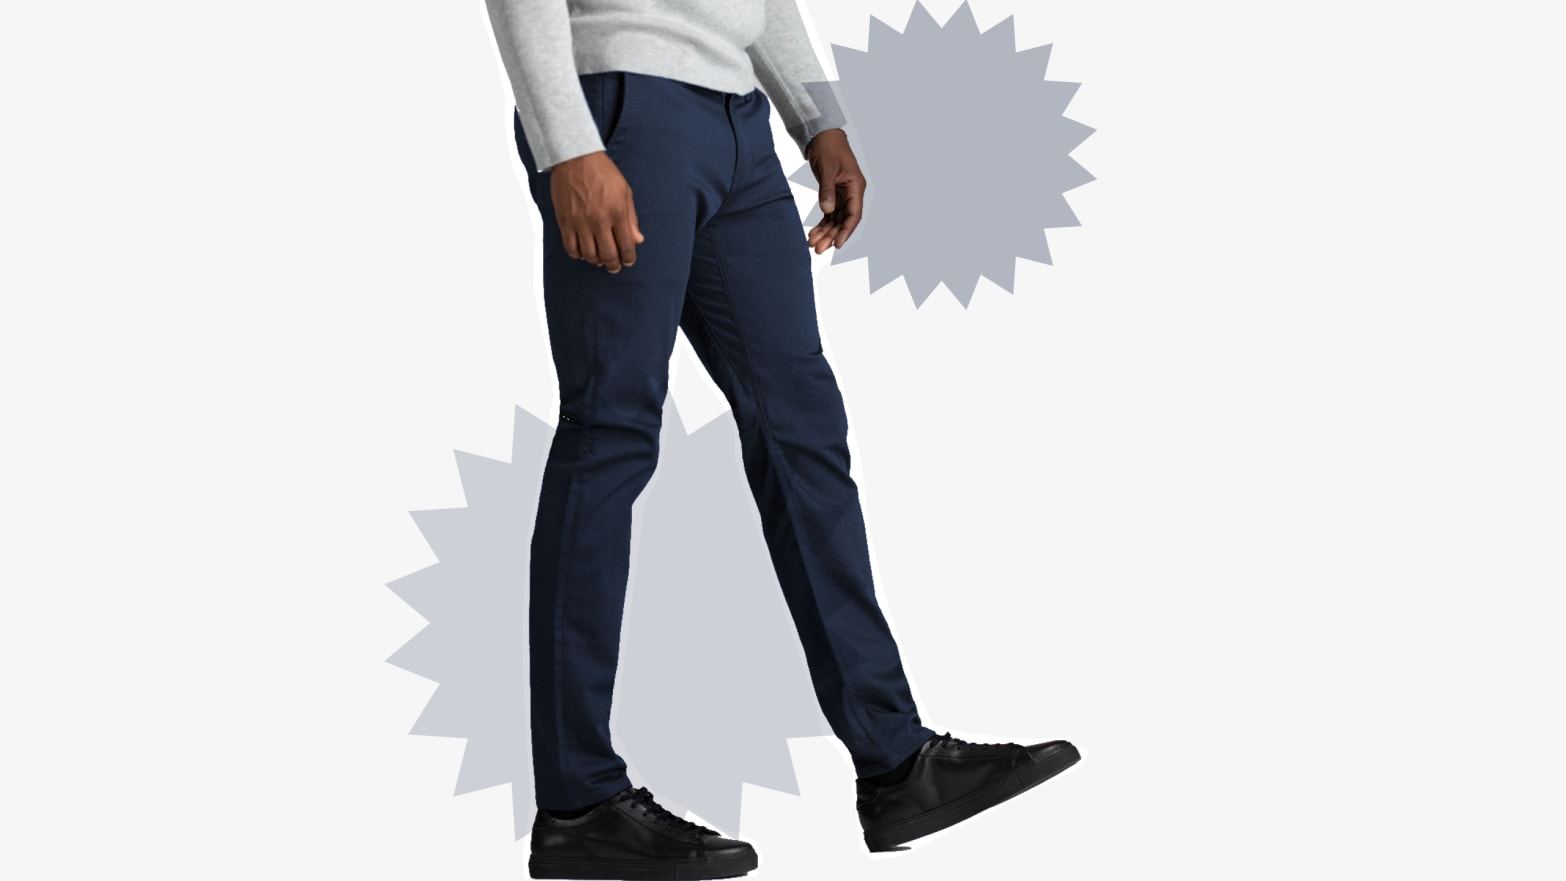 Duer pants review